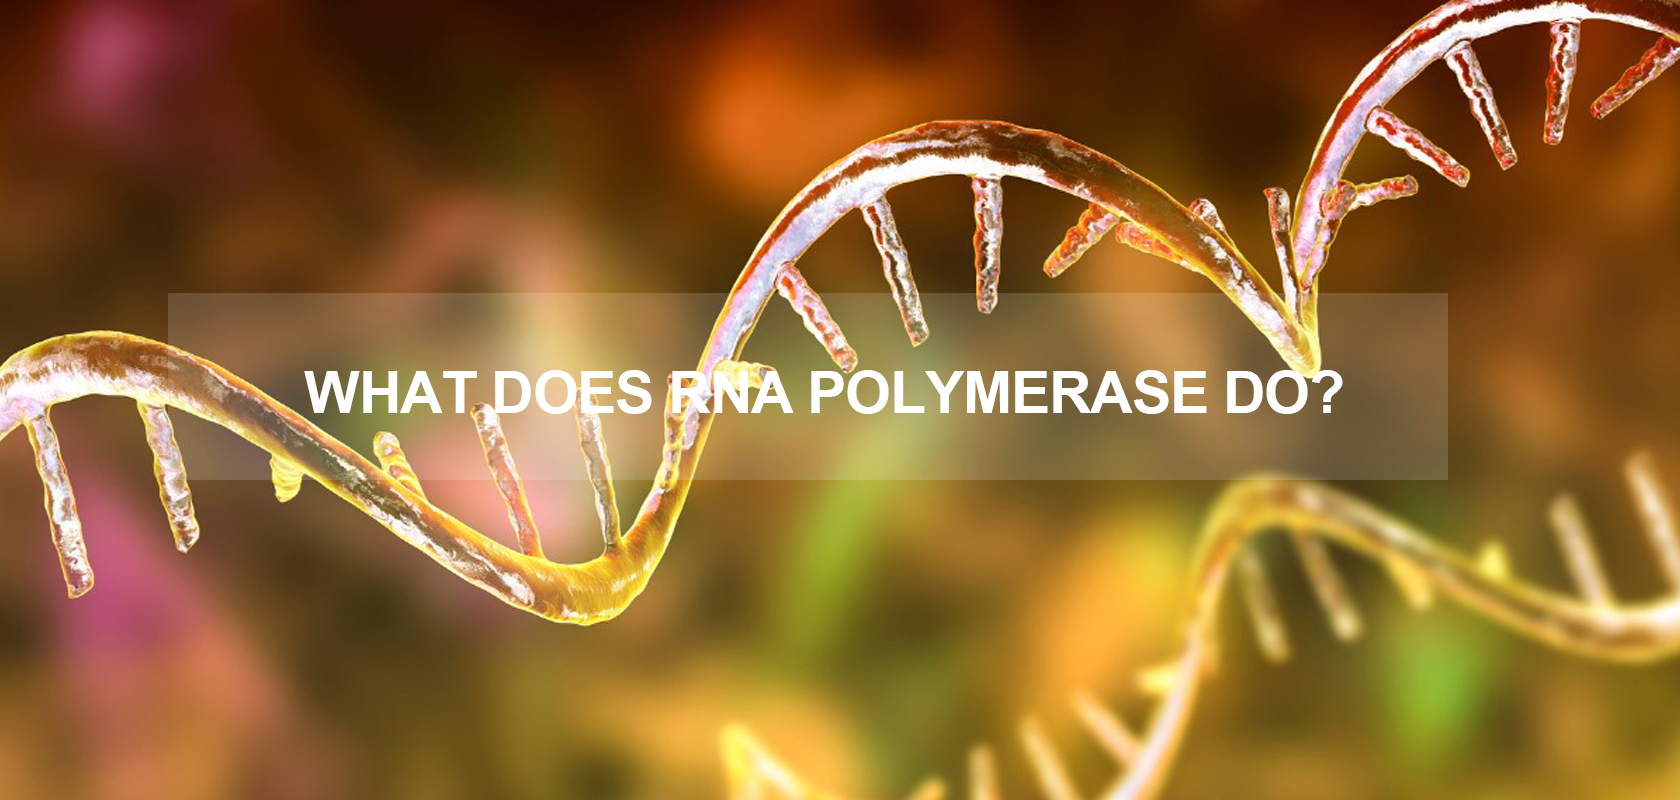 WHAT DOES RNA POLYMERASE DO?